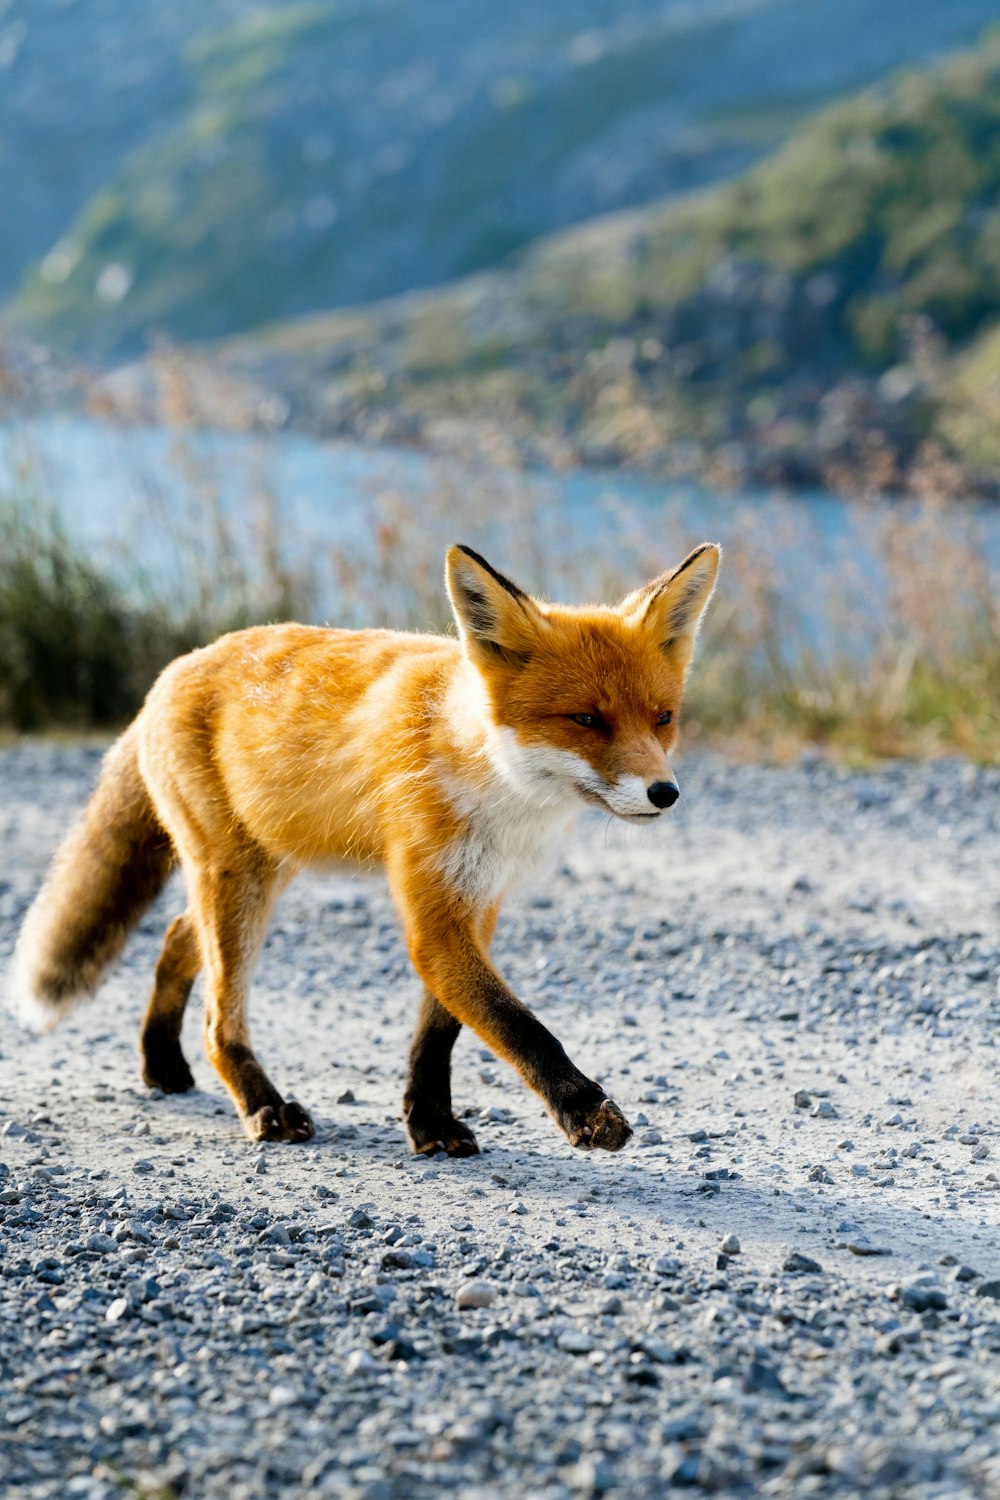 a fox walking on a rocky surface